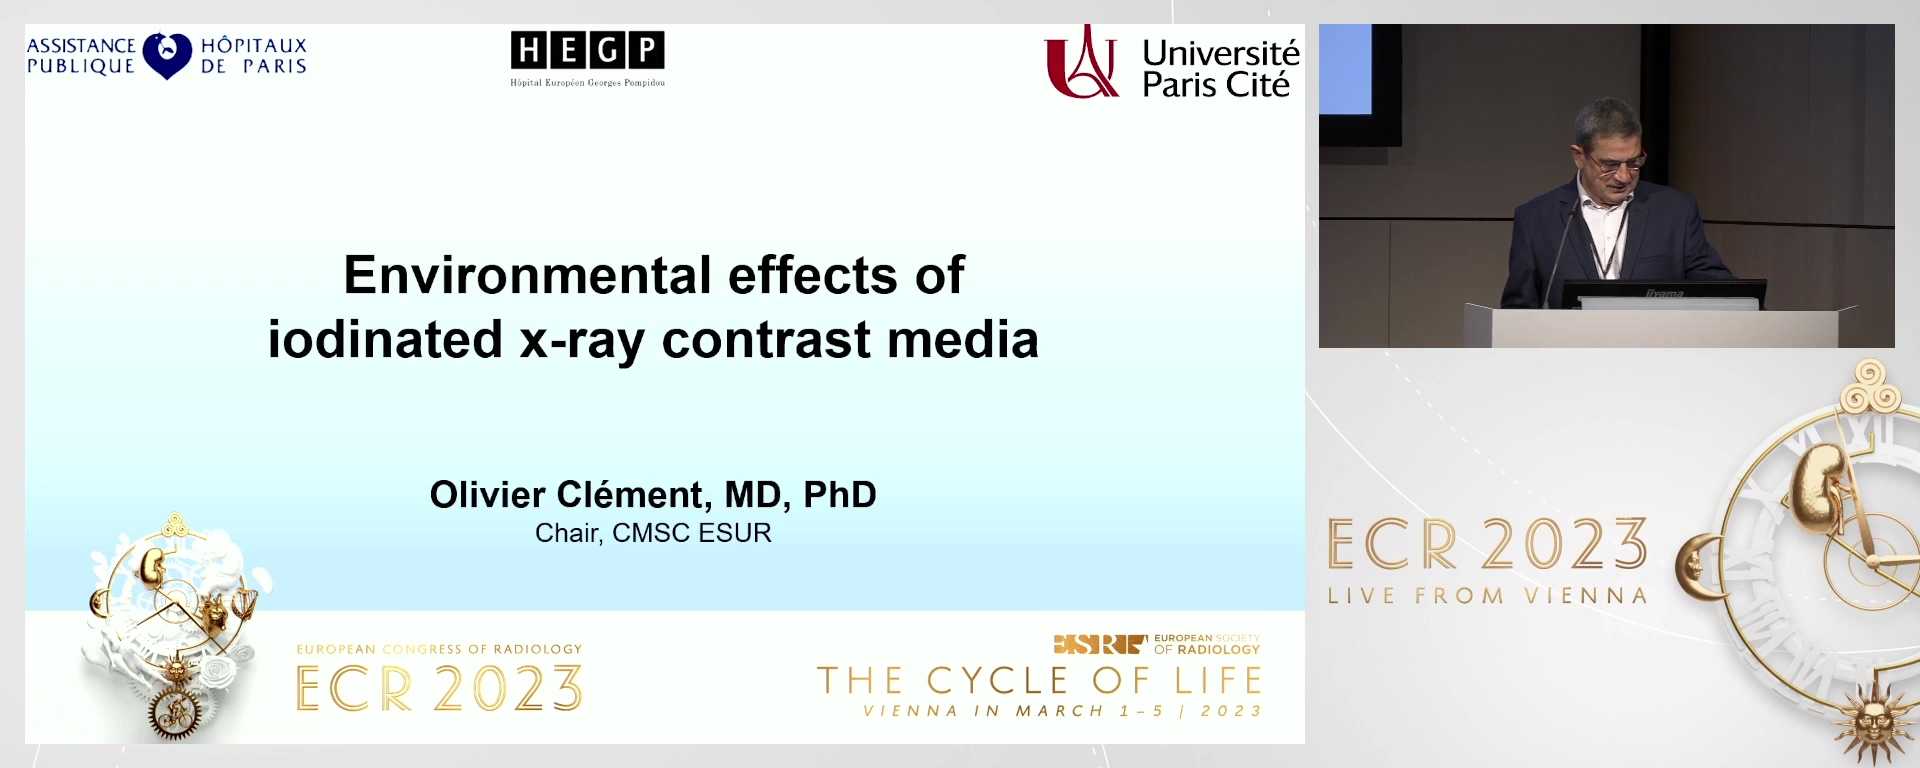 Environmental effects of iodinated x-ray contrast media - Olivier  Clément, Paris / FR